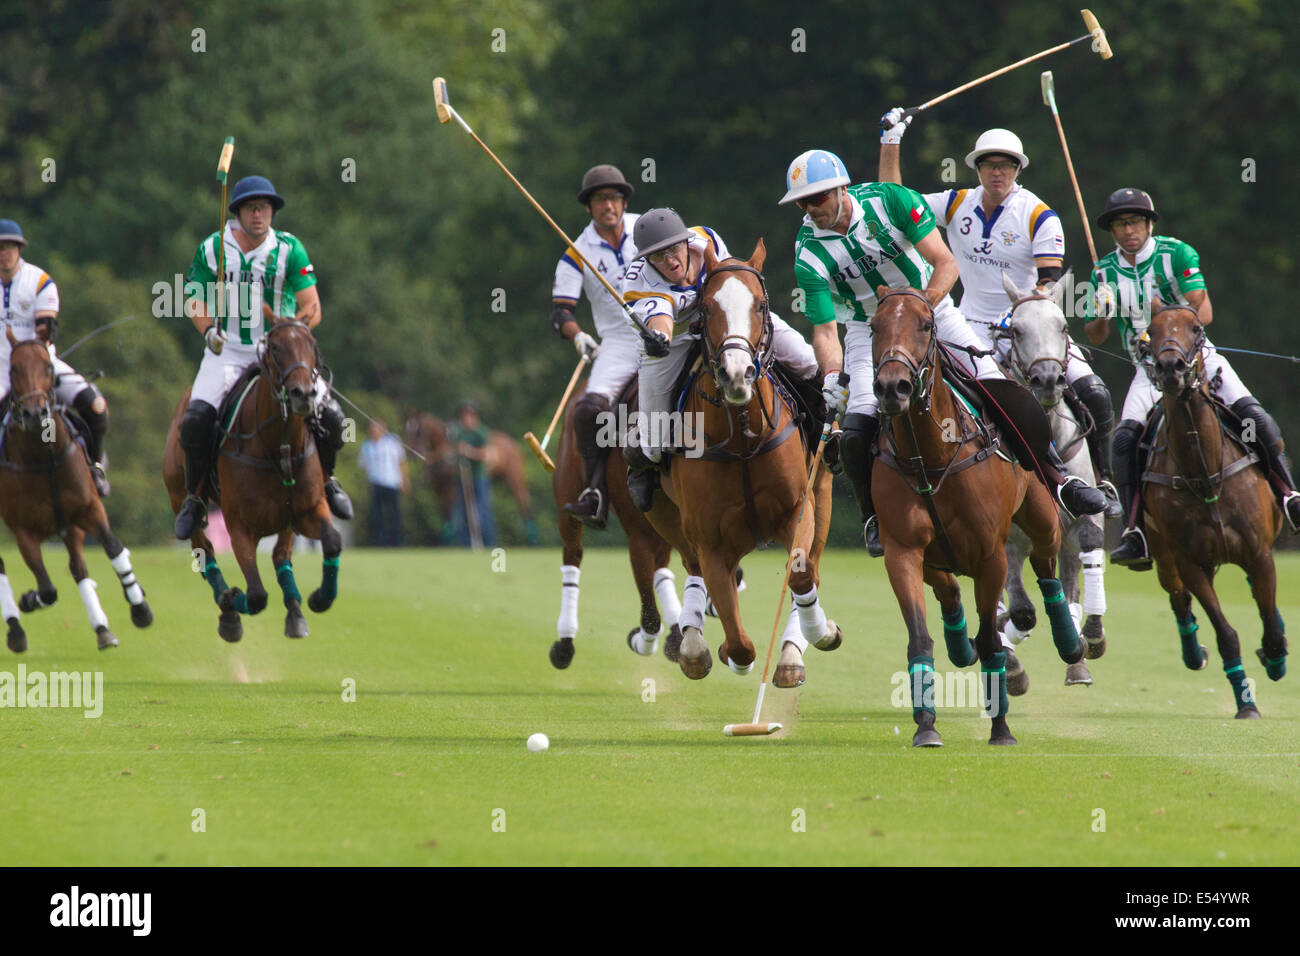 Veuve Clicquot Gold Cup, British Open Polo Championship, Cowdray Park Polo Club, Cowdray Park, Midhurst, West Sussex, England UK Stock Photo